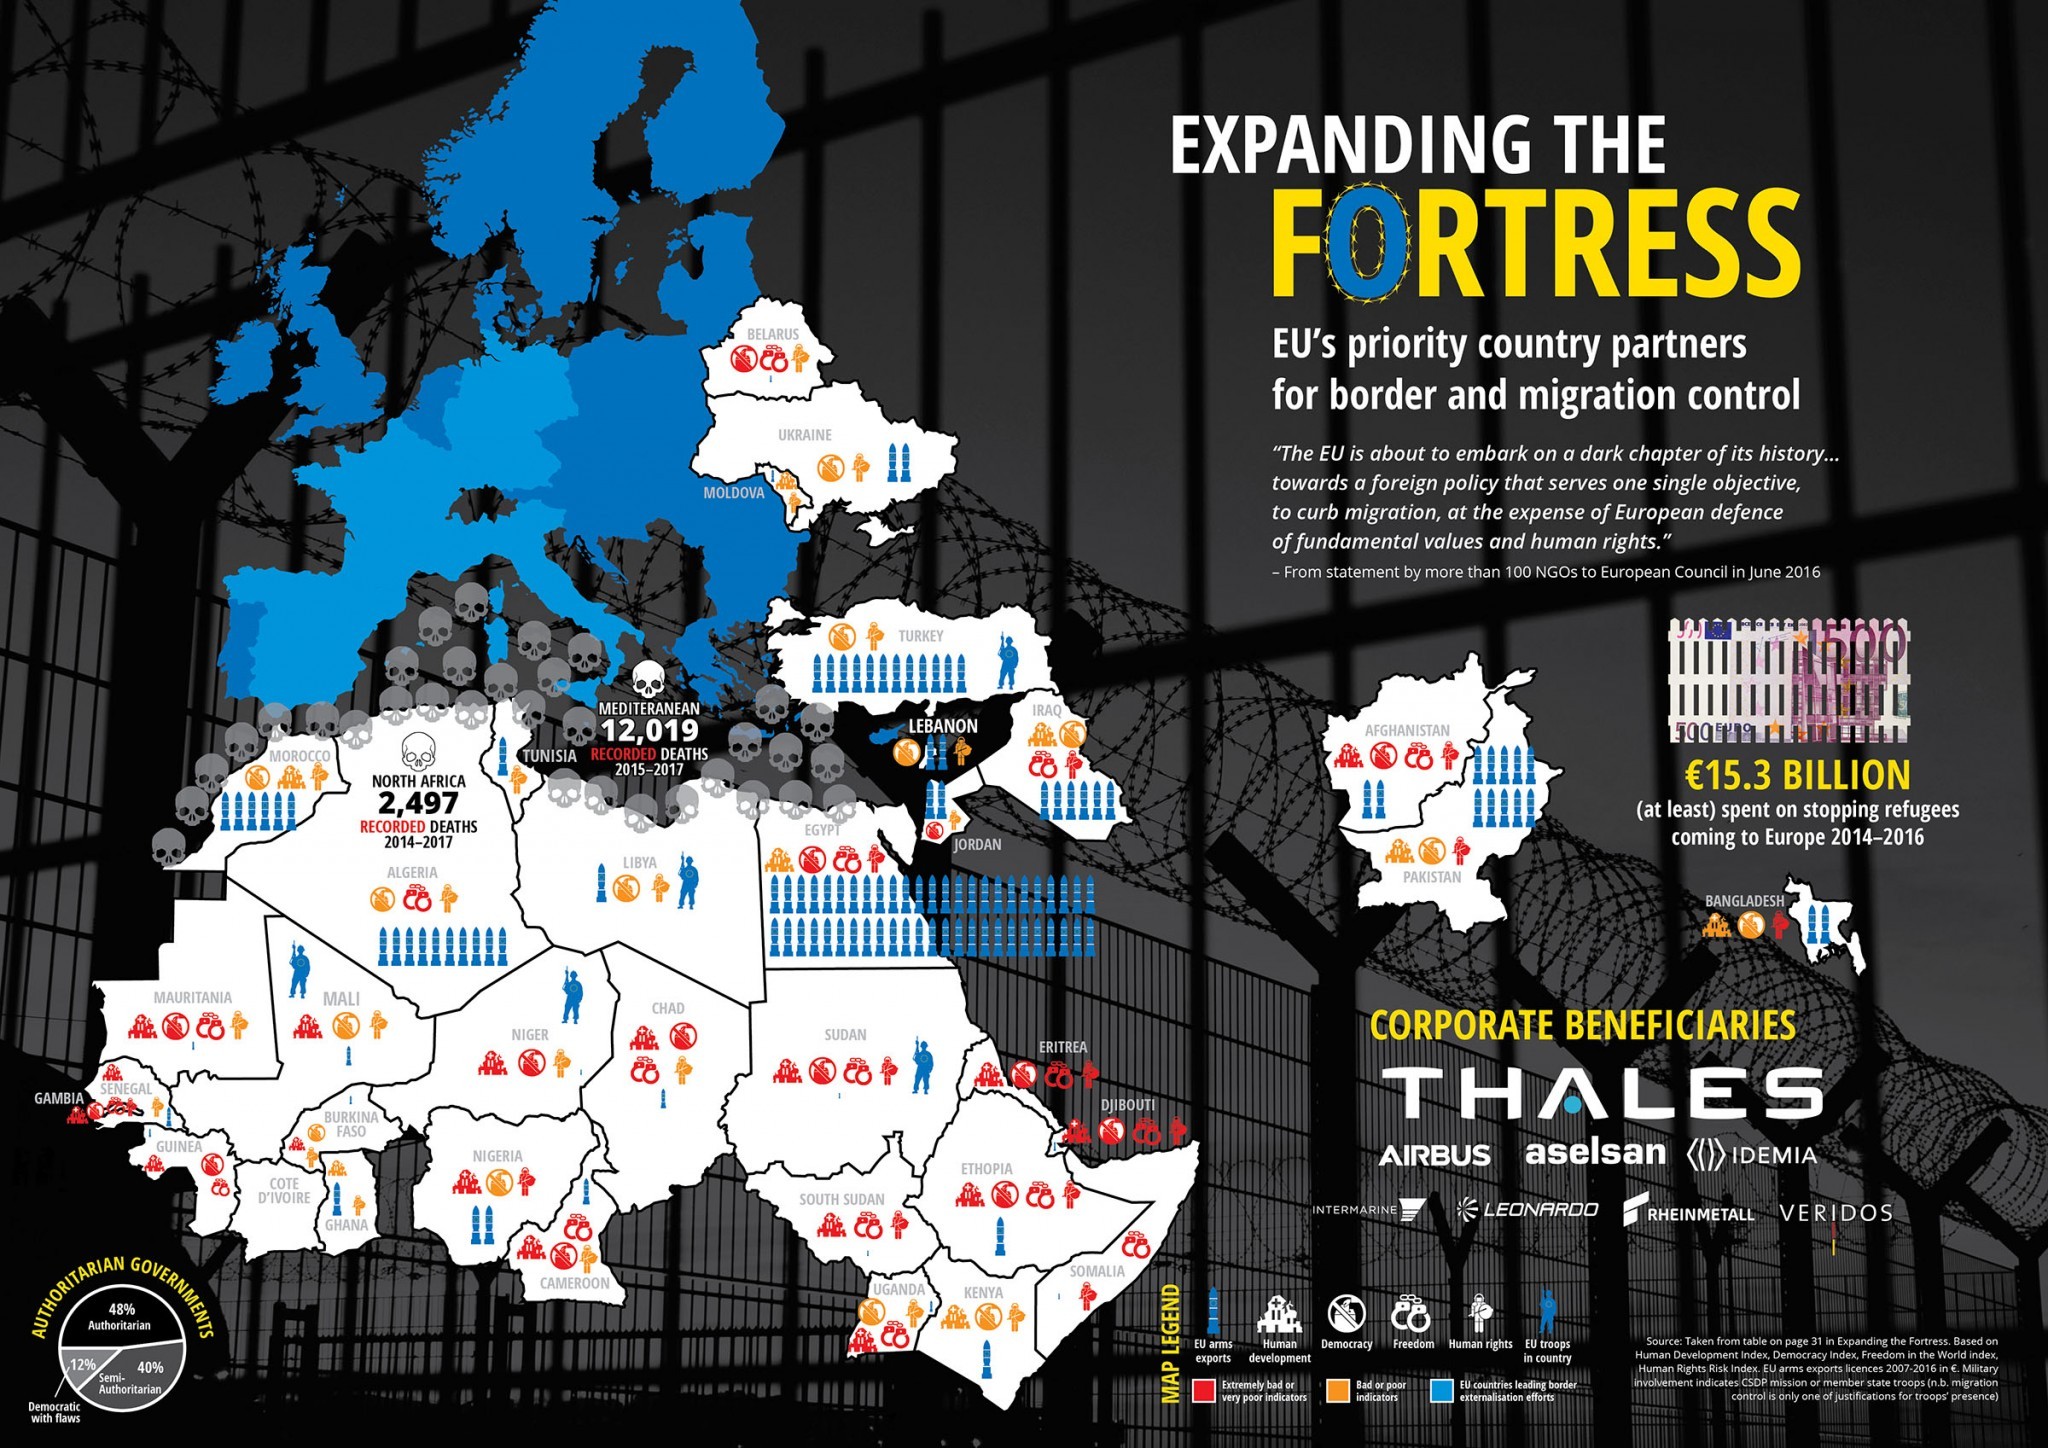 Expanding the fortress infographic